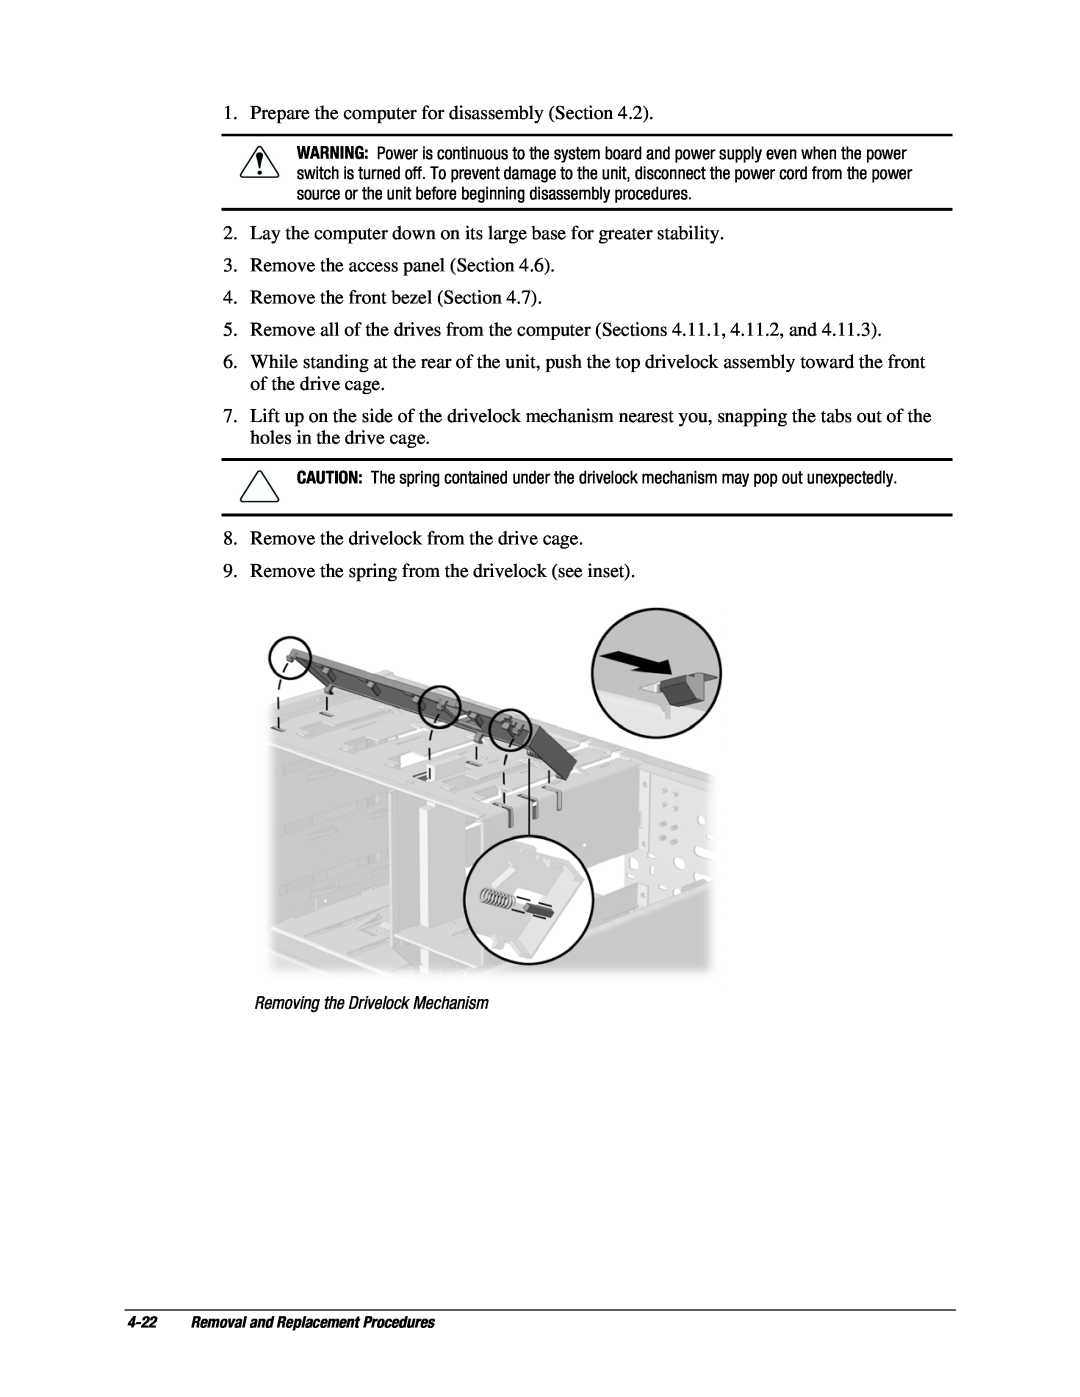 Compaq EP Series manual Removing the Drivelock Mechanism, Removal and Replacement Procedures 